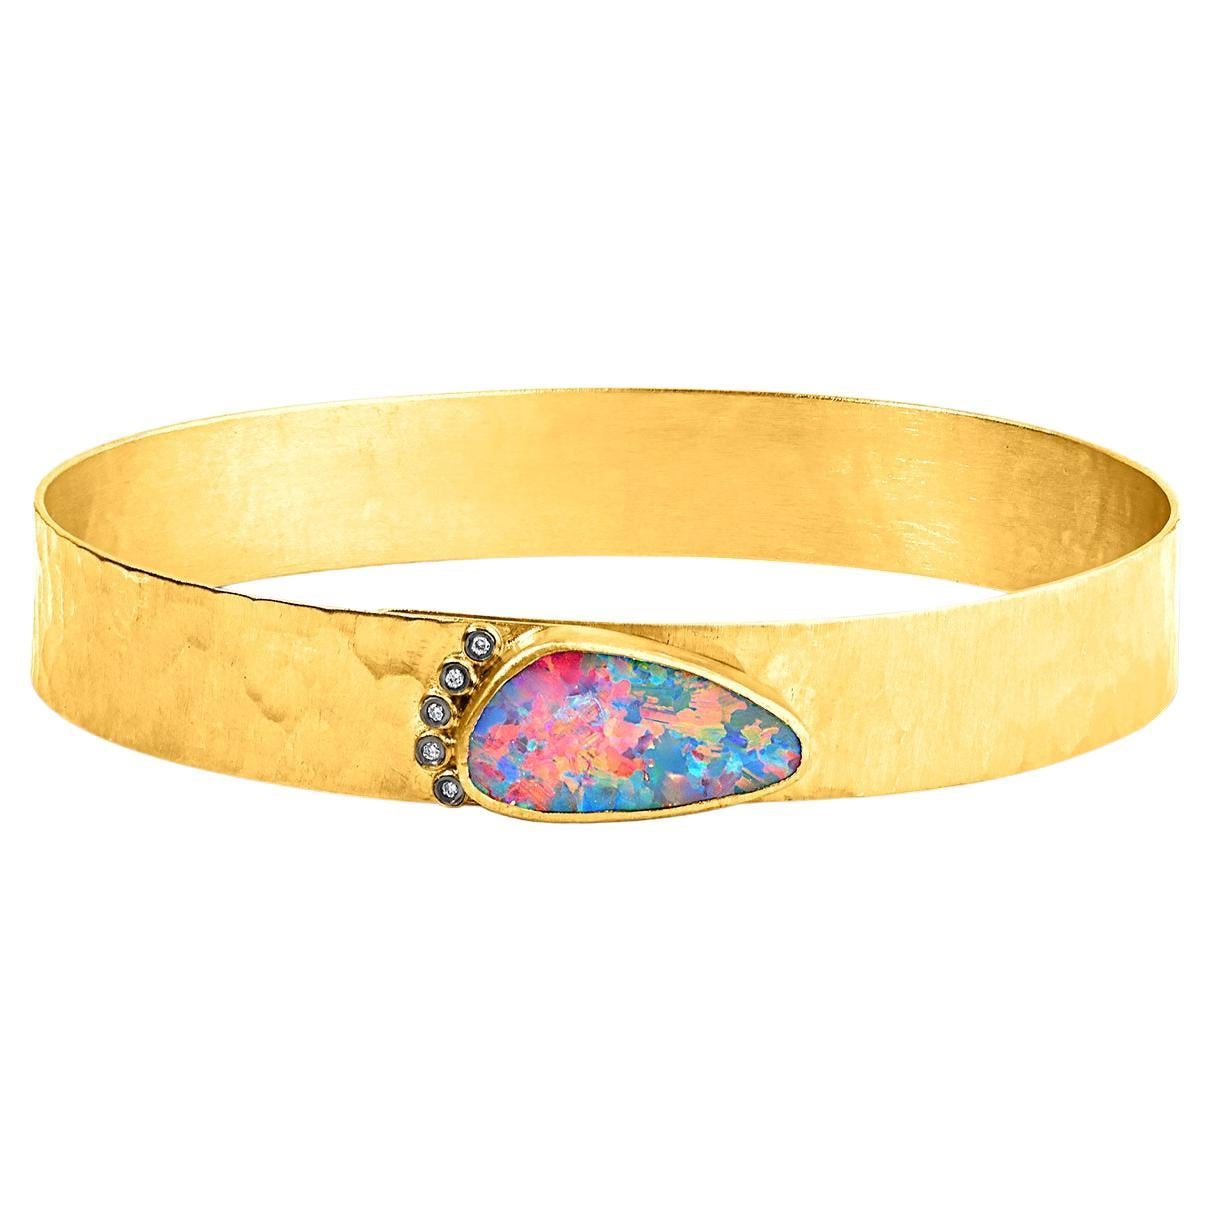 Doublet Opal Bracelet with Diamonds 24 Karat Gold and Silver by Kurtulan For Sale